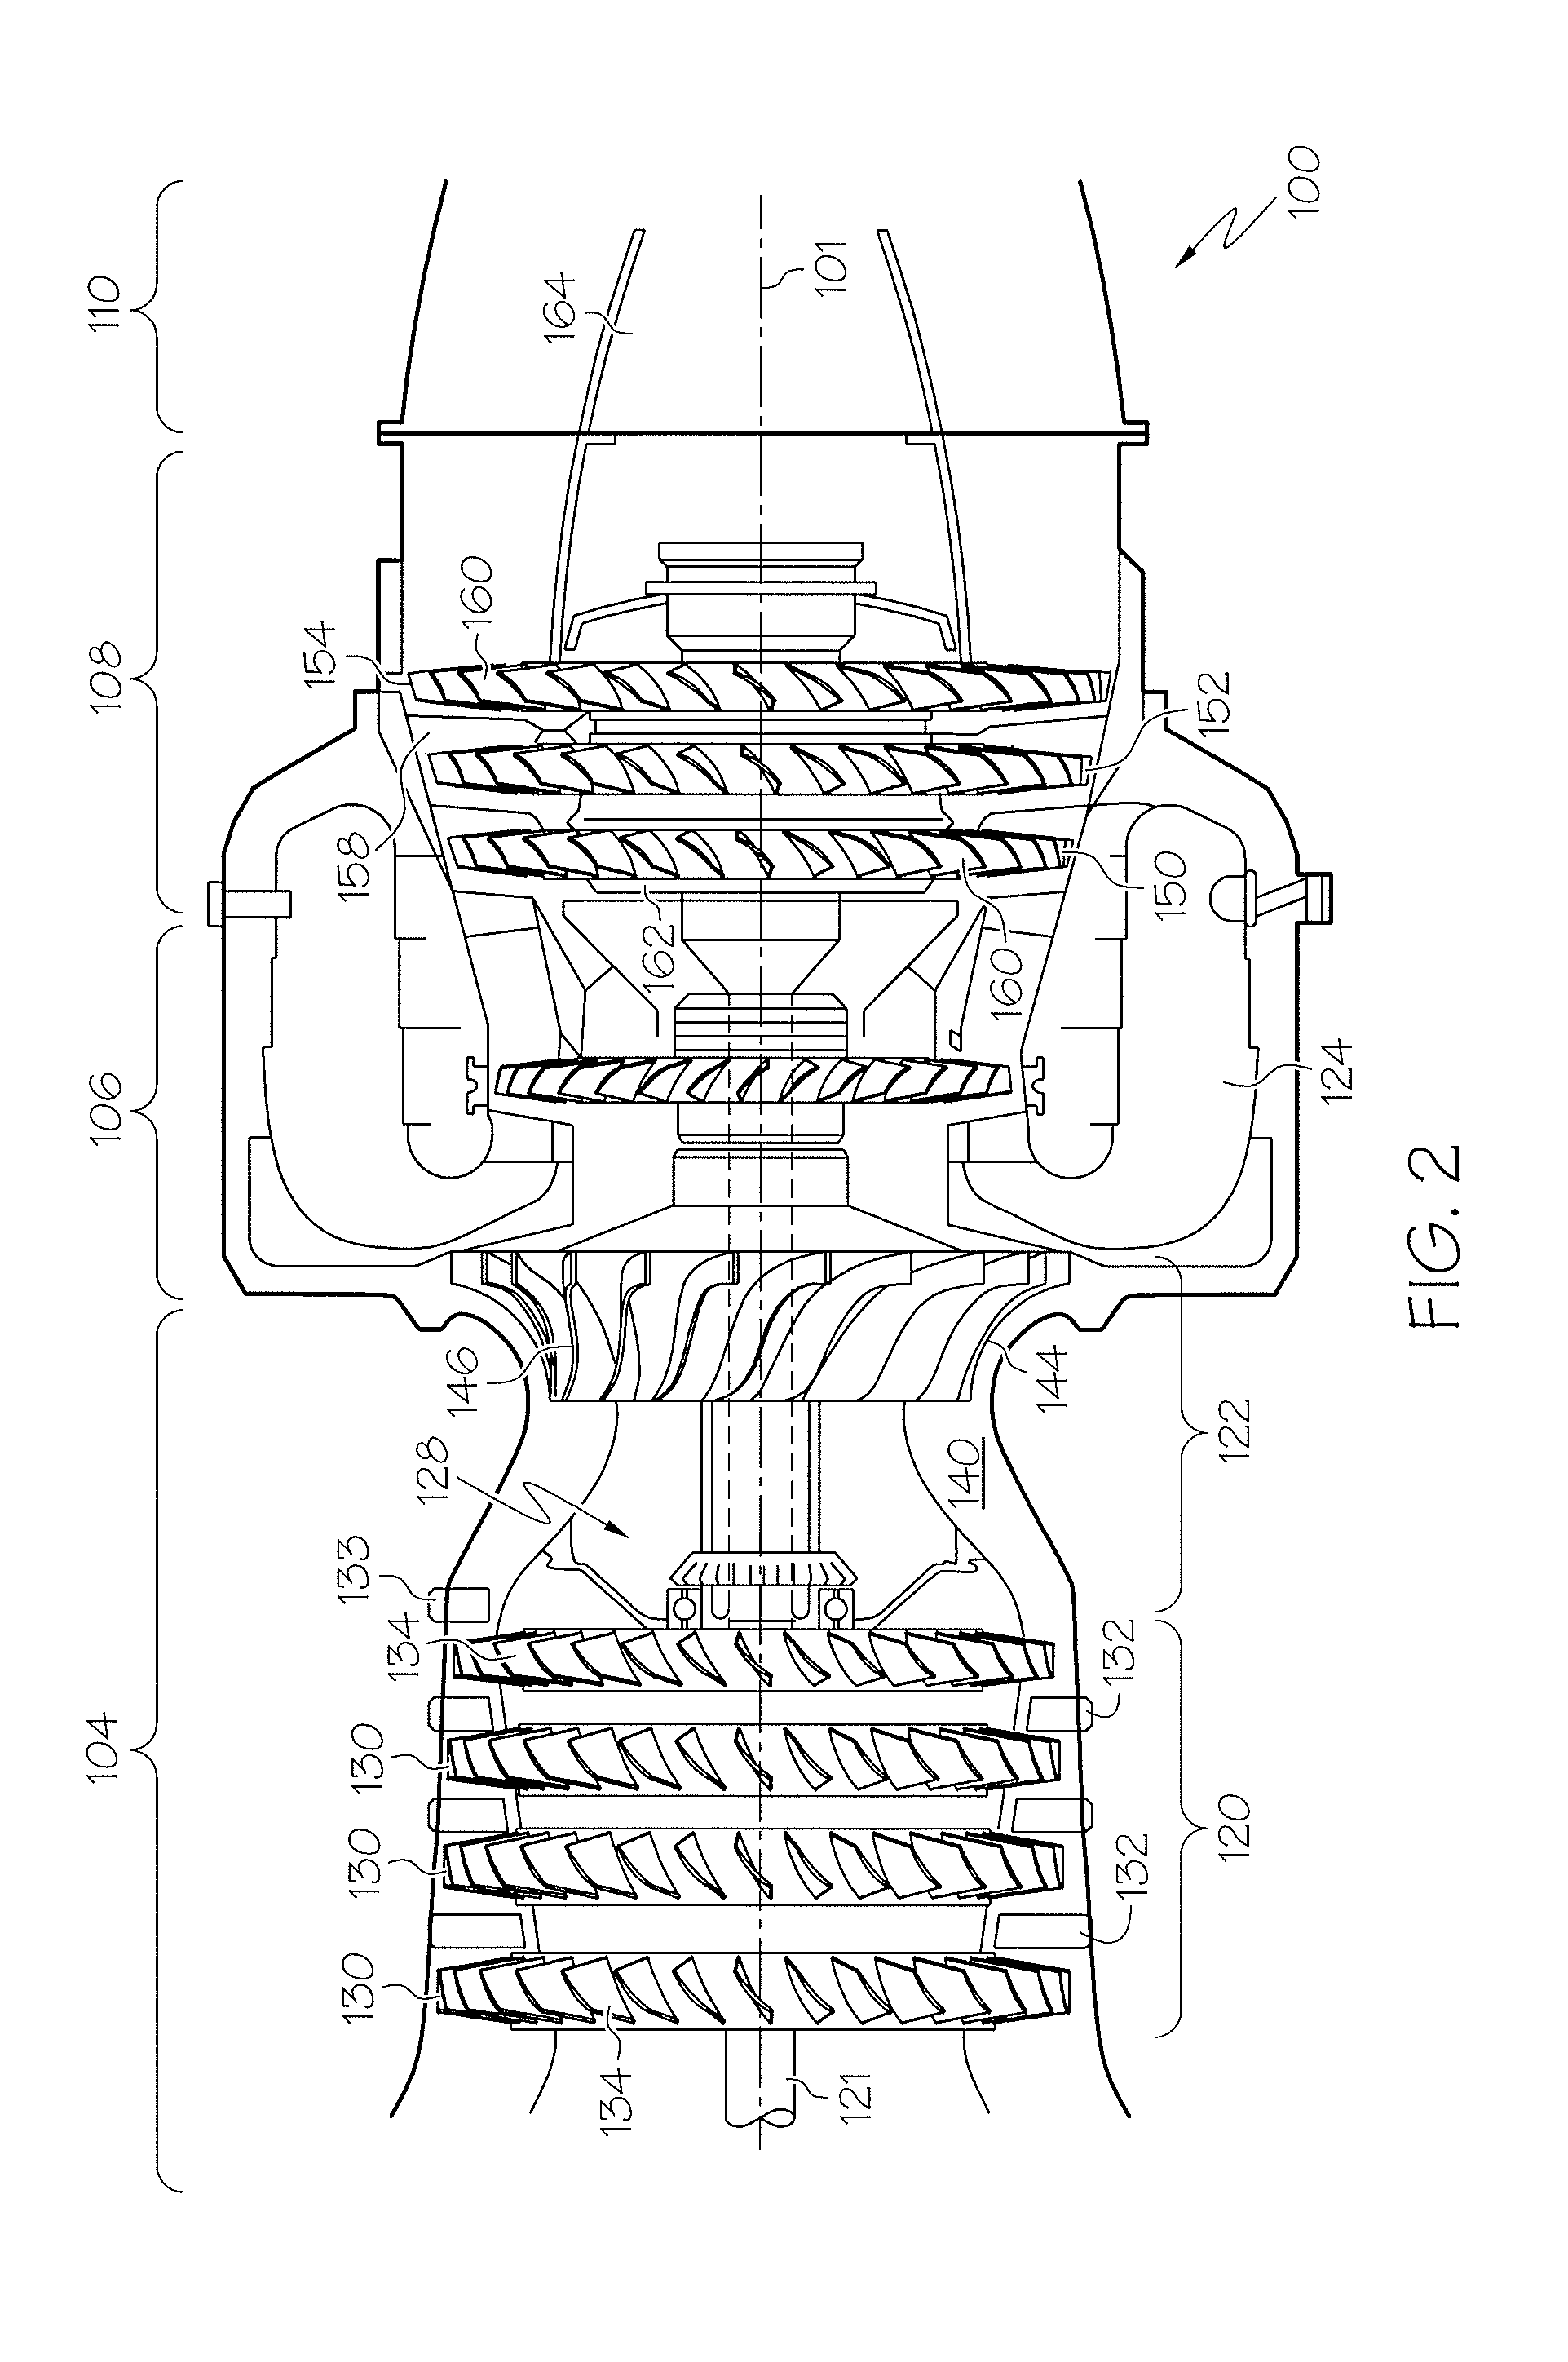 Vortex spoiler for delivery of cooling airflow in a turbine engine